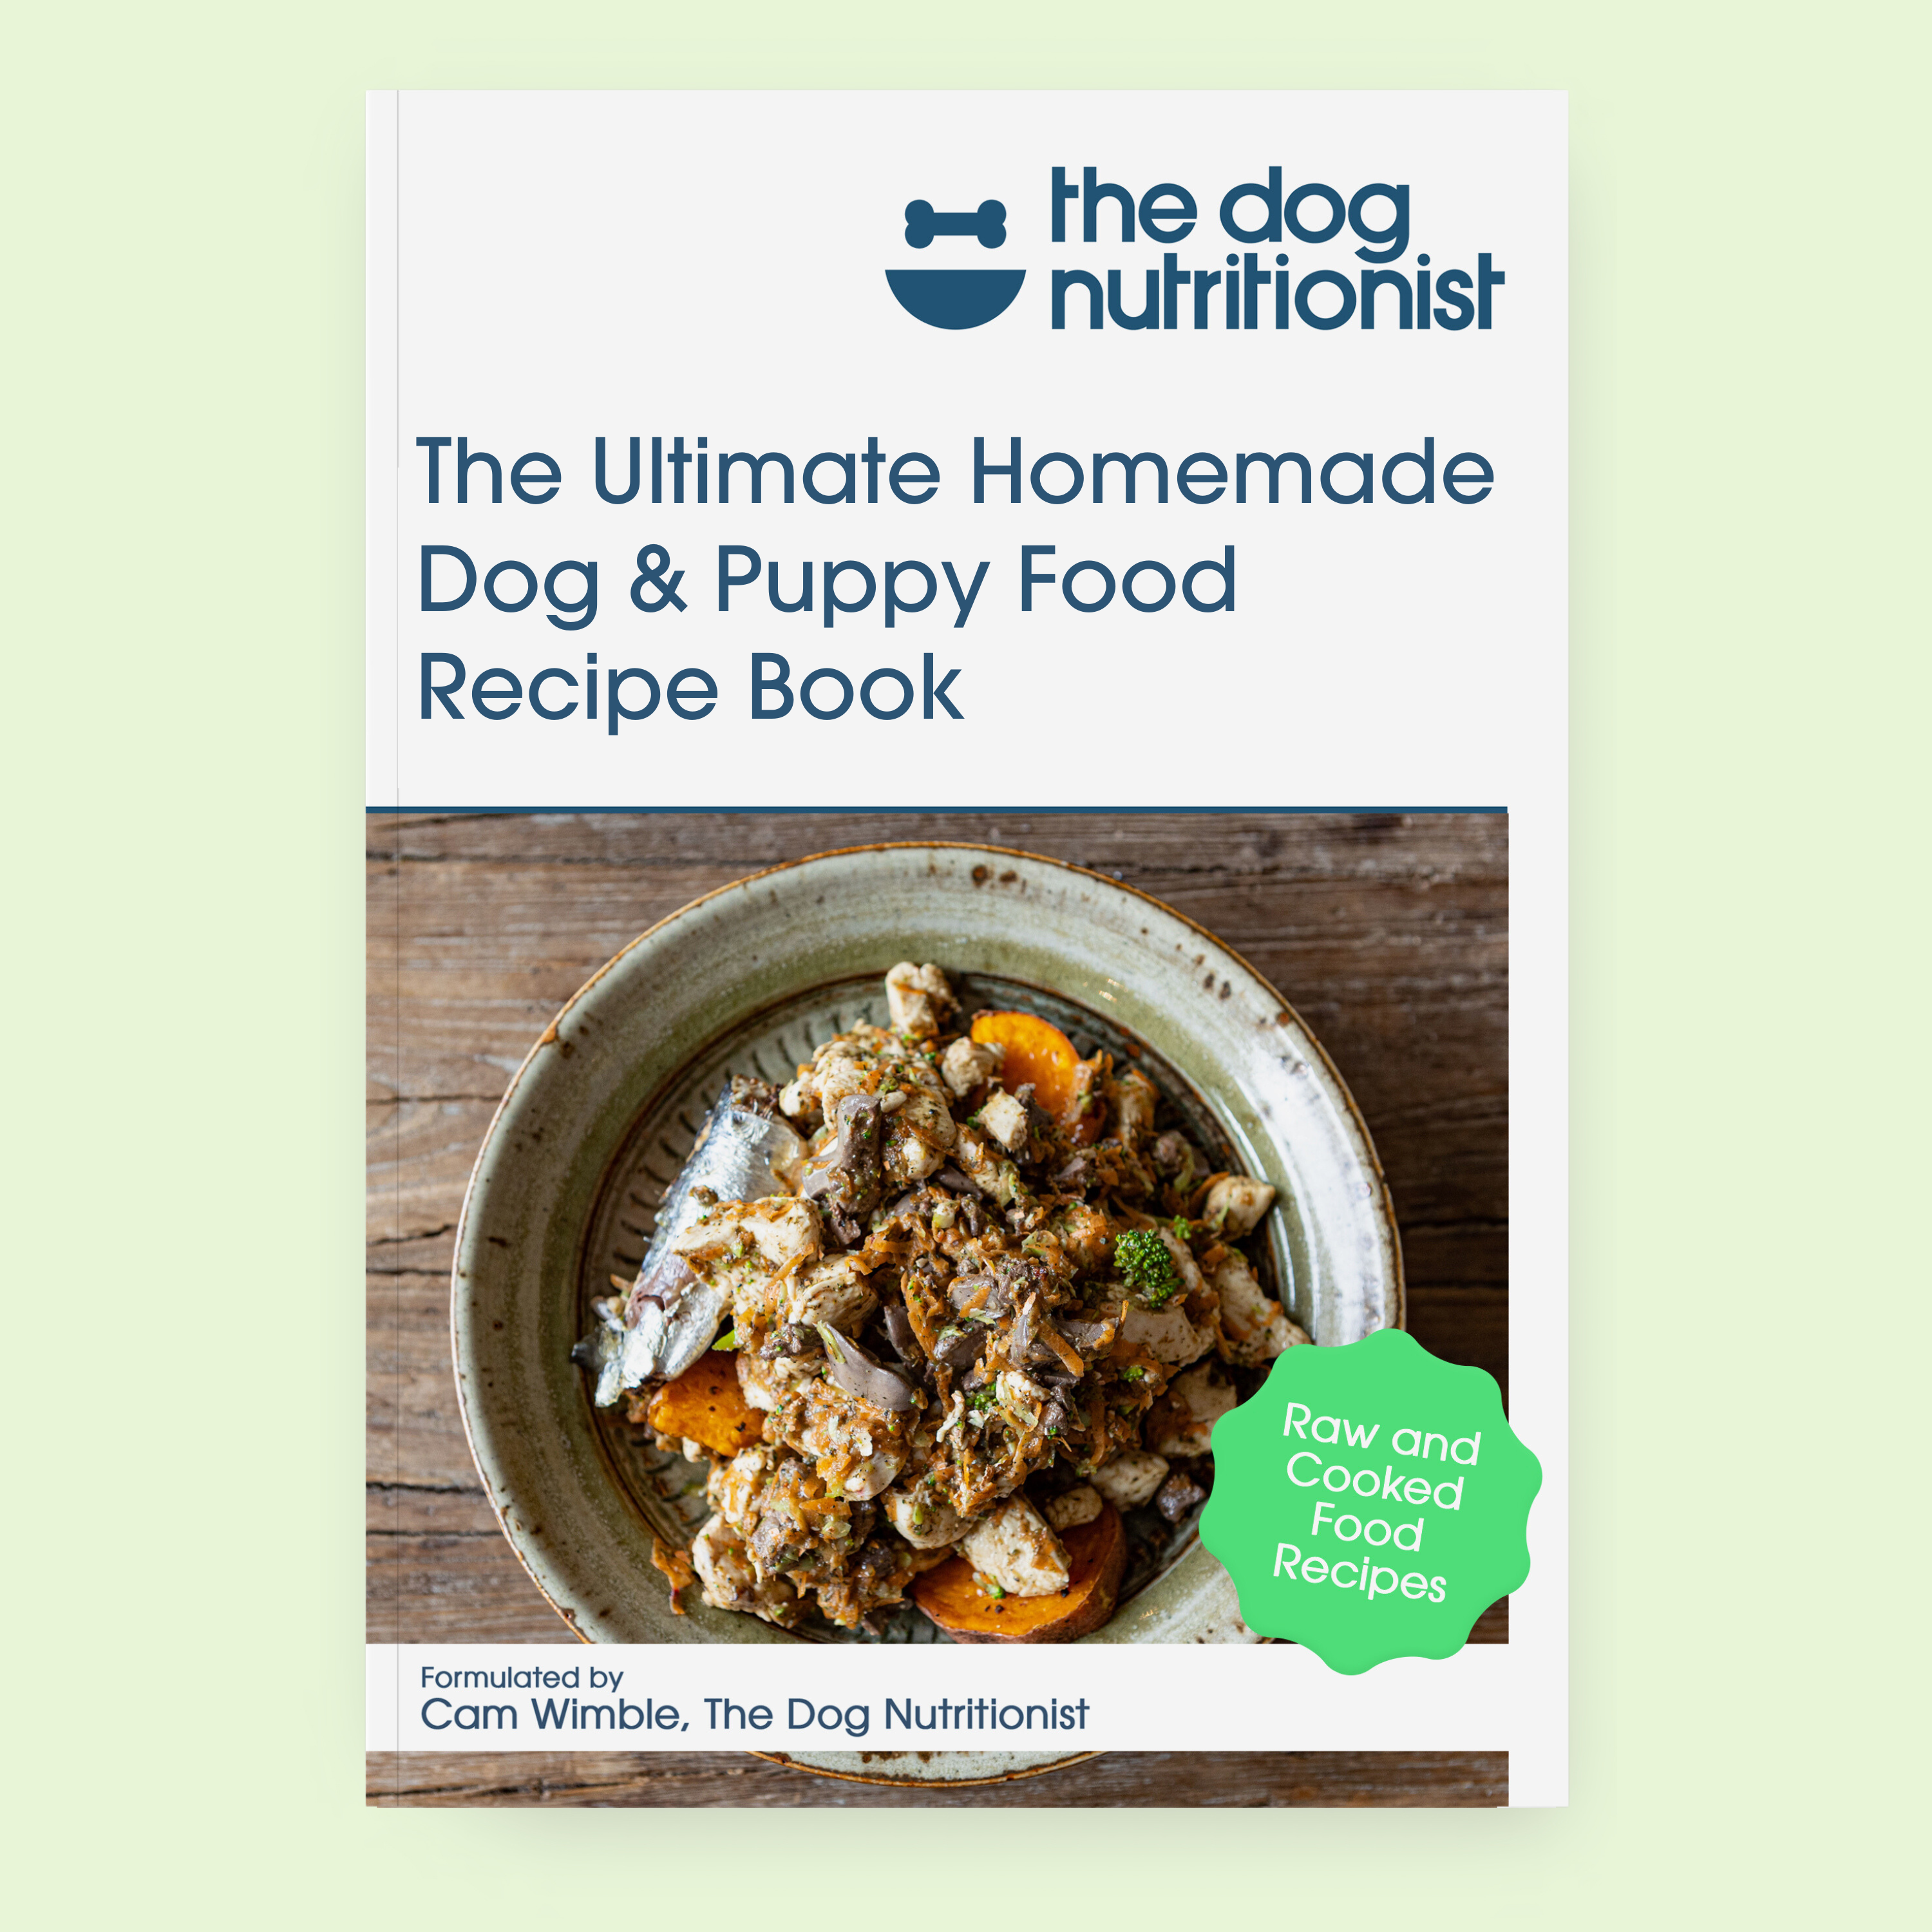 The Ultimate Homemade Dog & Puppy Food Recipe Book – The Dog Nutritionist